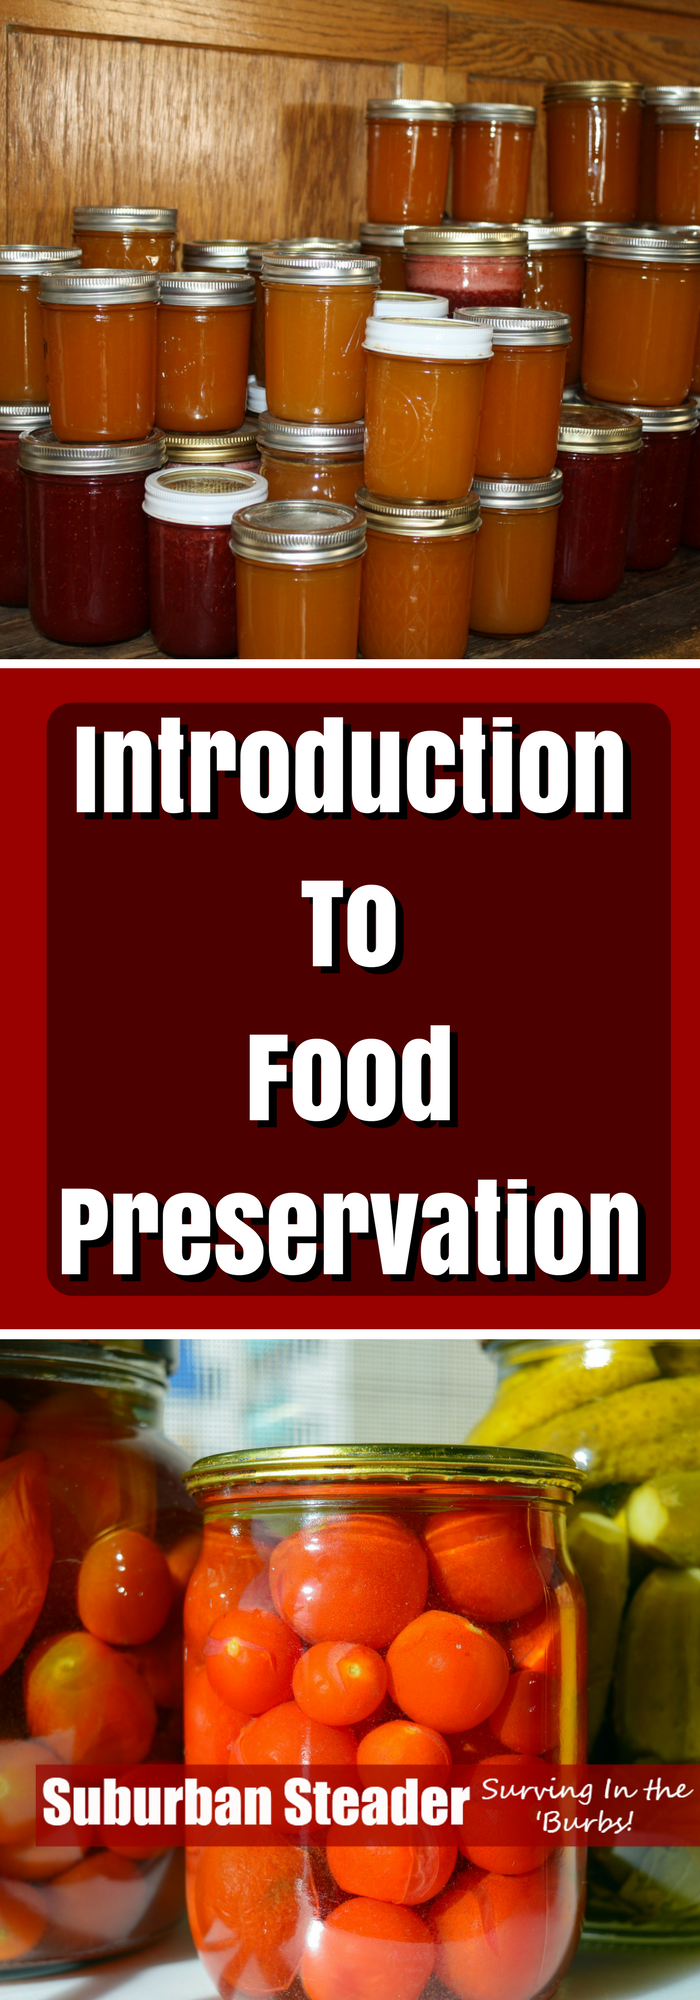 Introduction To Food Preservation